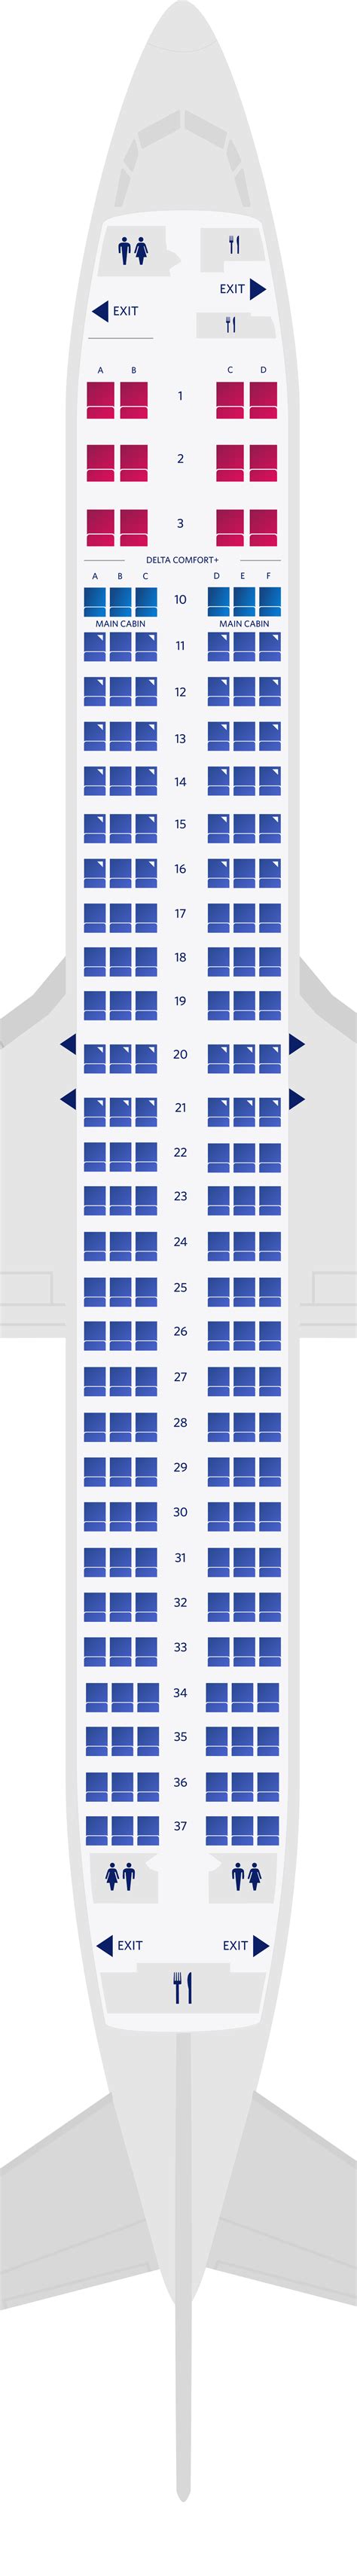 boeing 737 seating chart delta